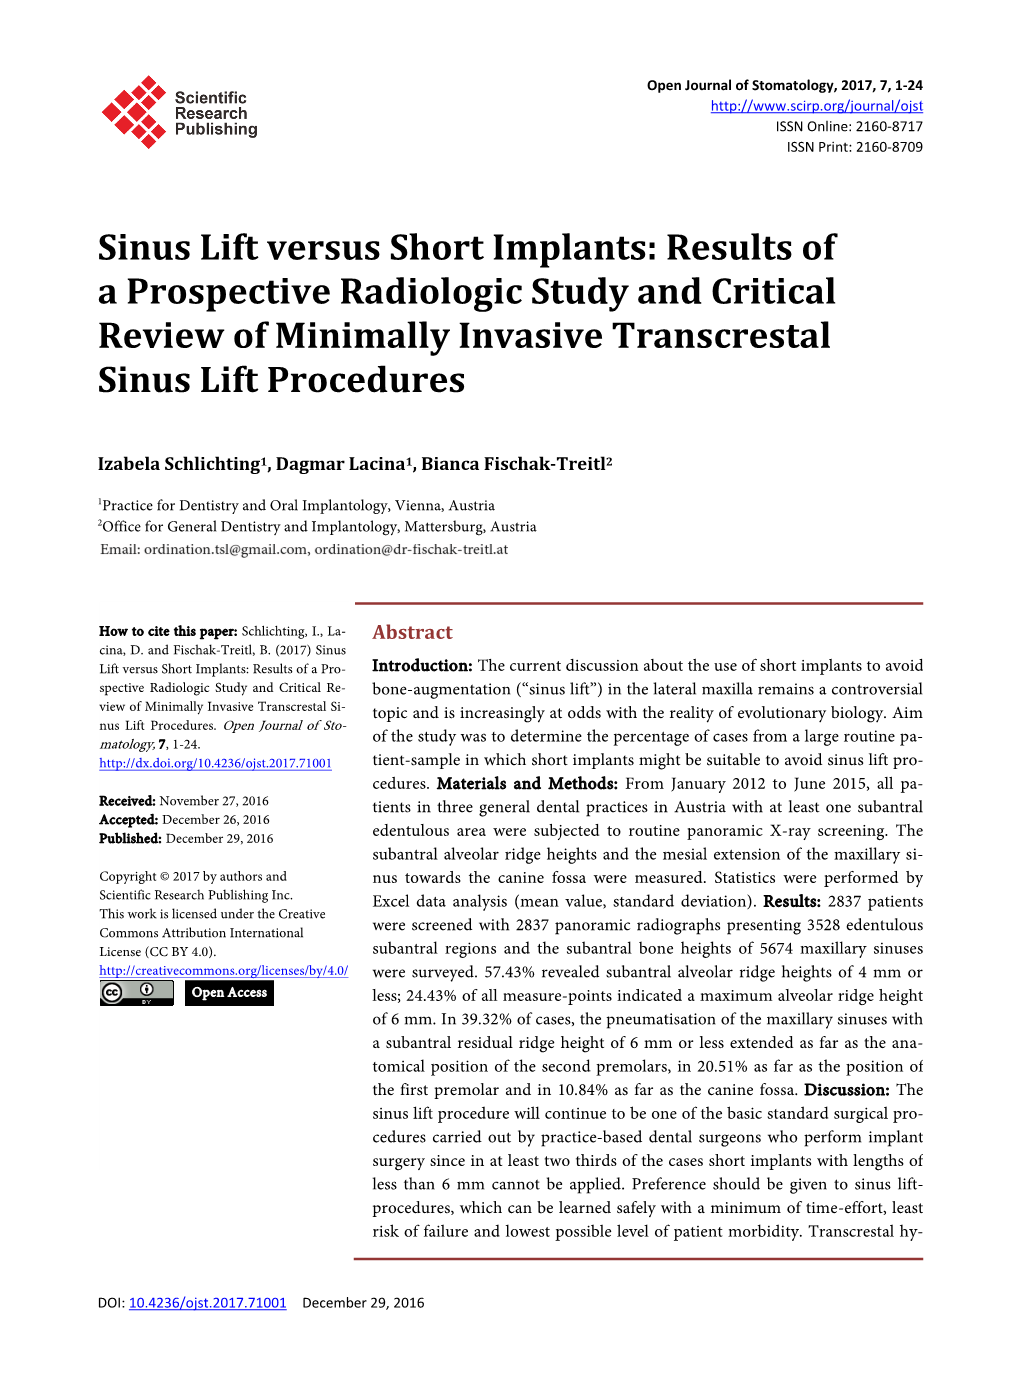 Sinus Lift Versus Short Implants: Results of a Prospective Radiologic Study and Critical Review of Minimally Invasive Transcrestal Sinus Lift Procedures